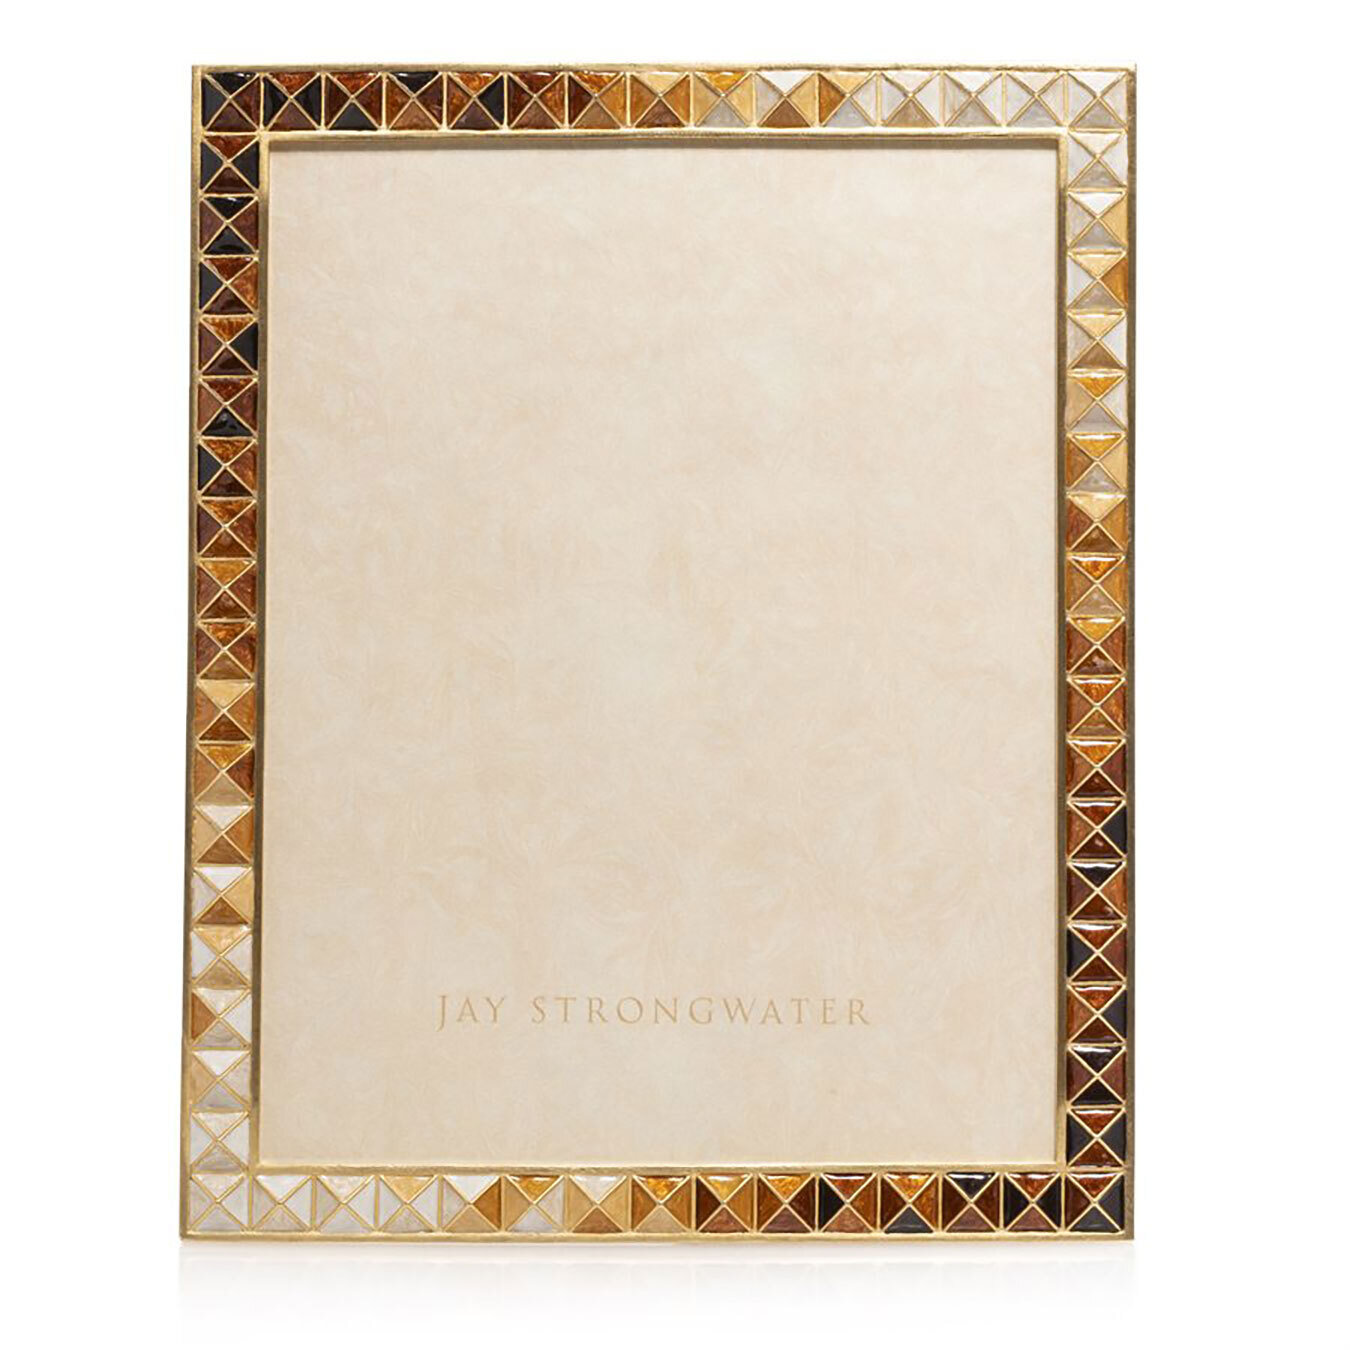 Jay Strongwater Pyramid 8 X 10 Inch Picture Frame SPF5878-248